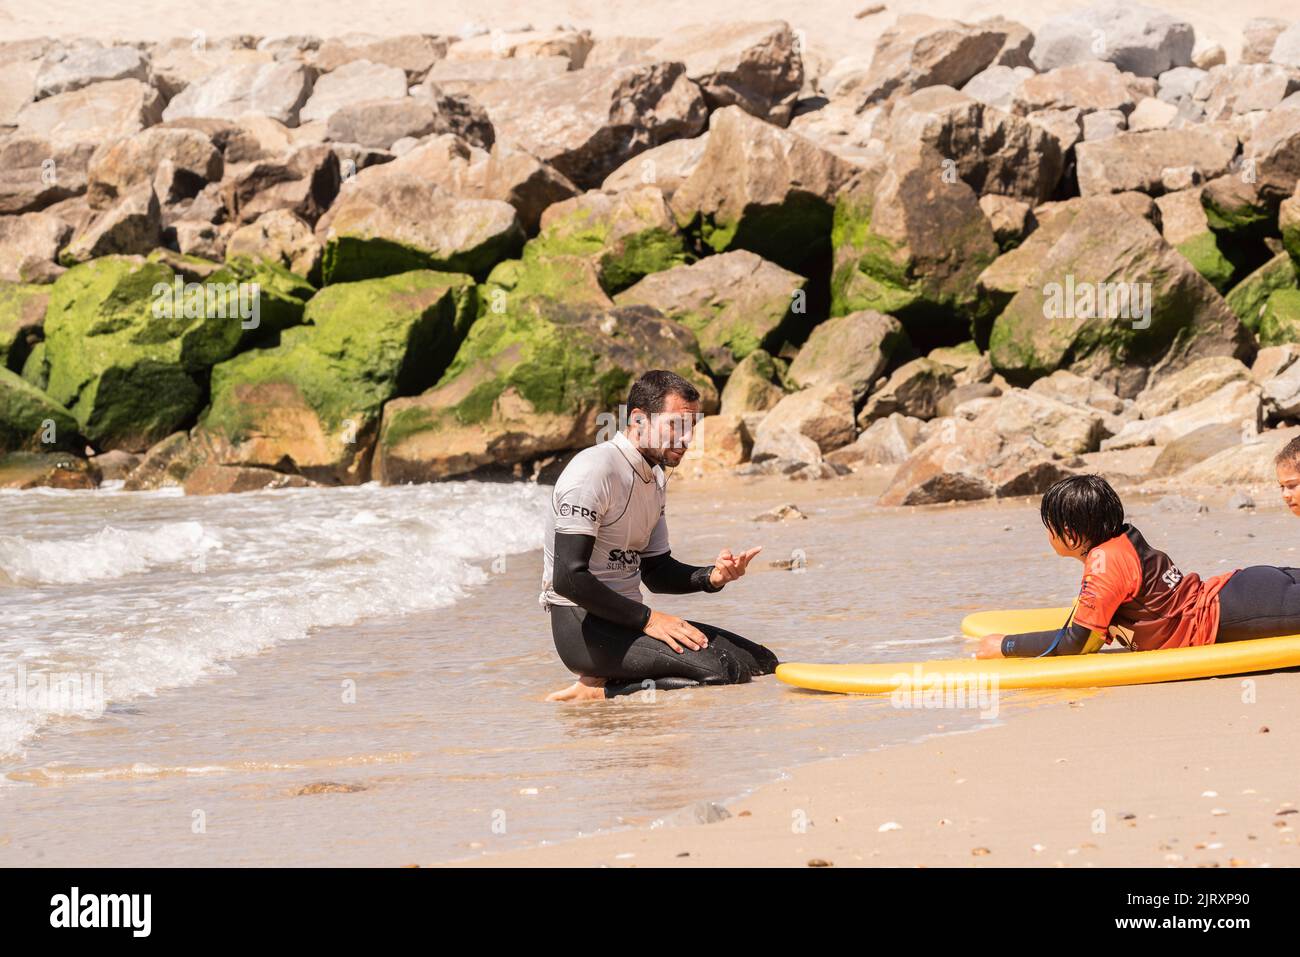 Aveiro, Portugal. august 19 - 2022: Surf lessons for children in the beach with surfboard in the sand. Stock Photo